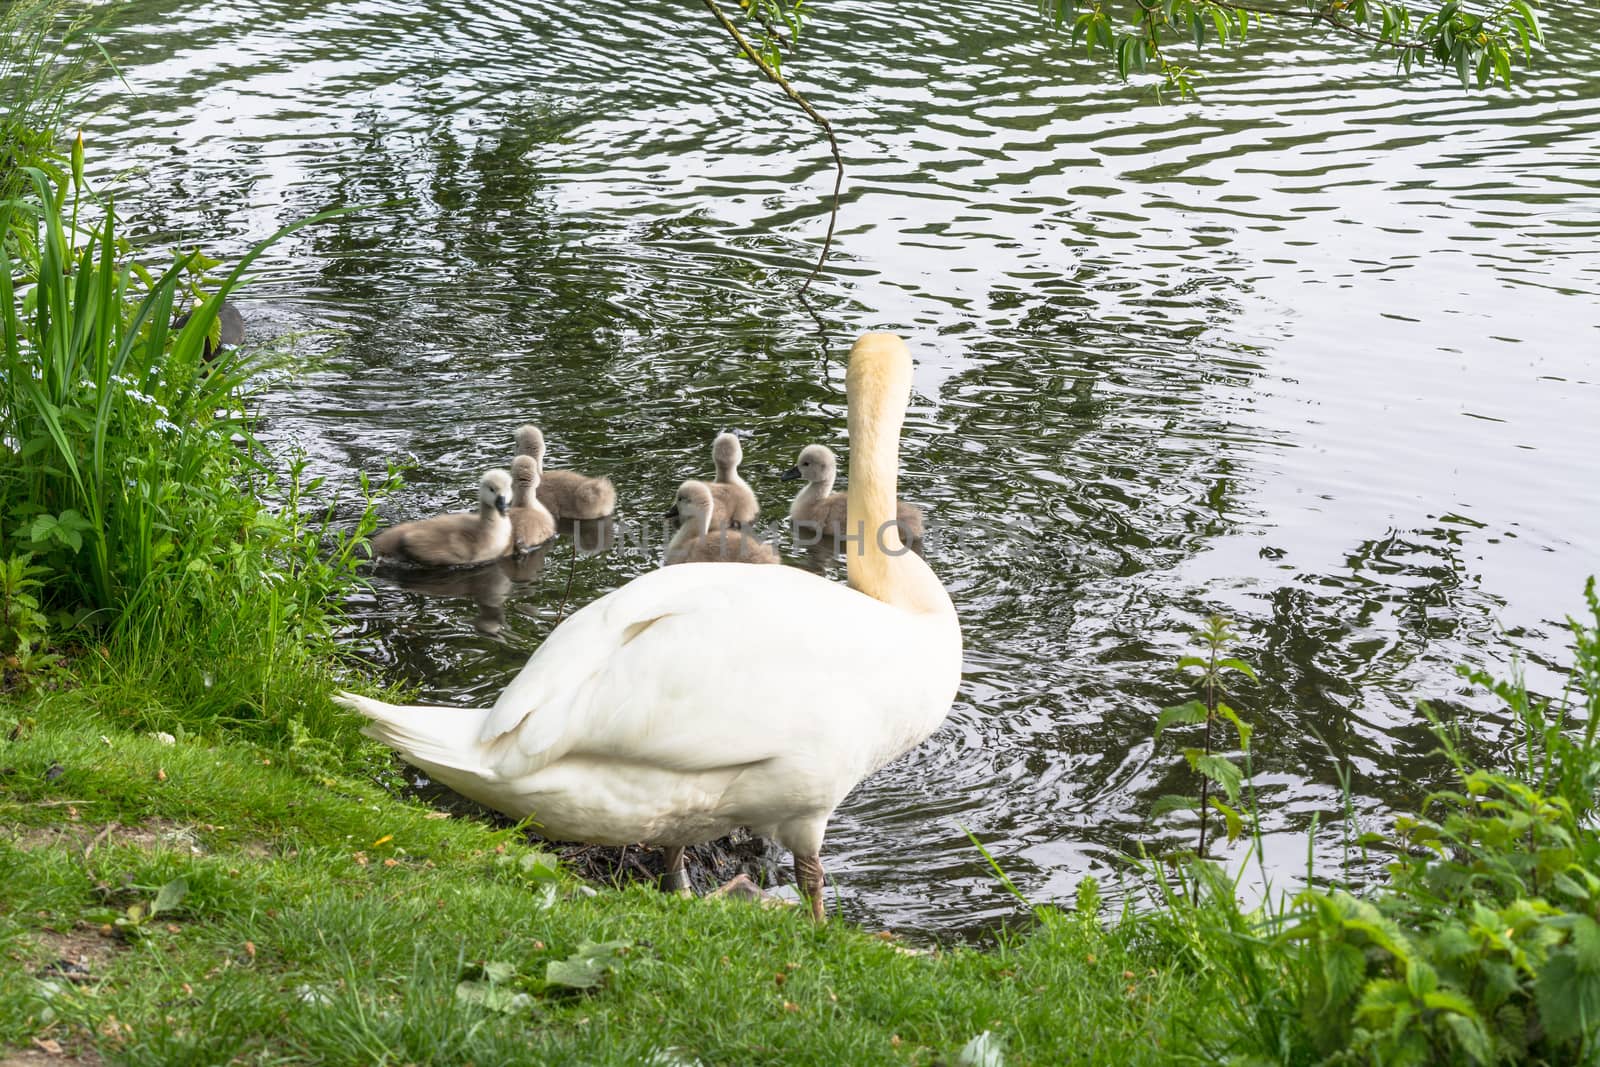 White swan with Cygnets           by JFsPic